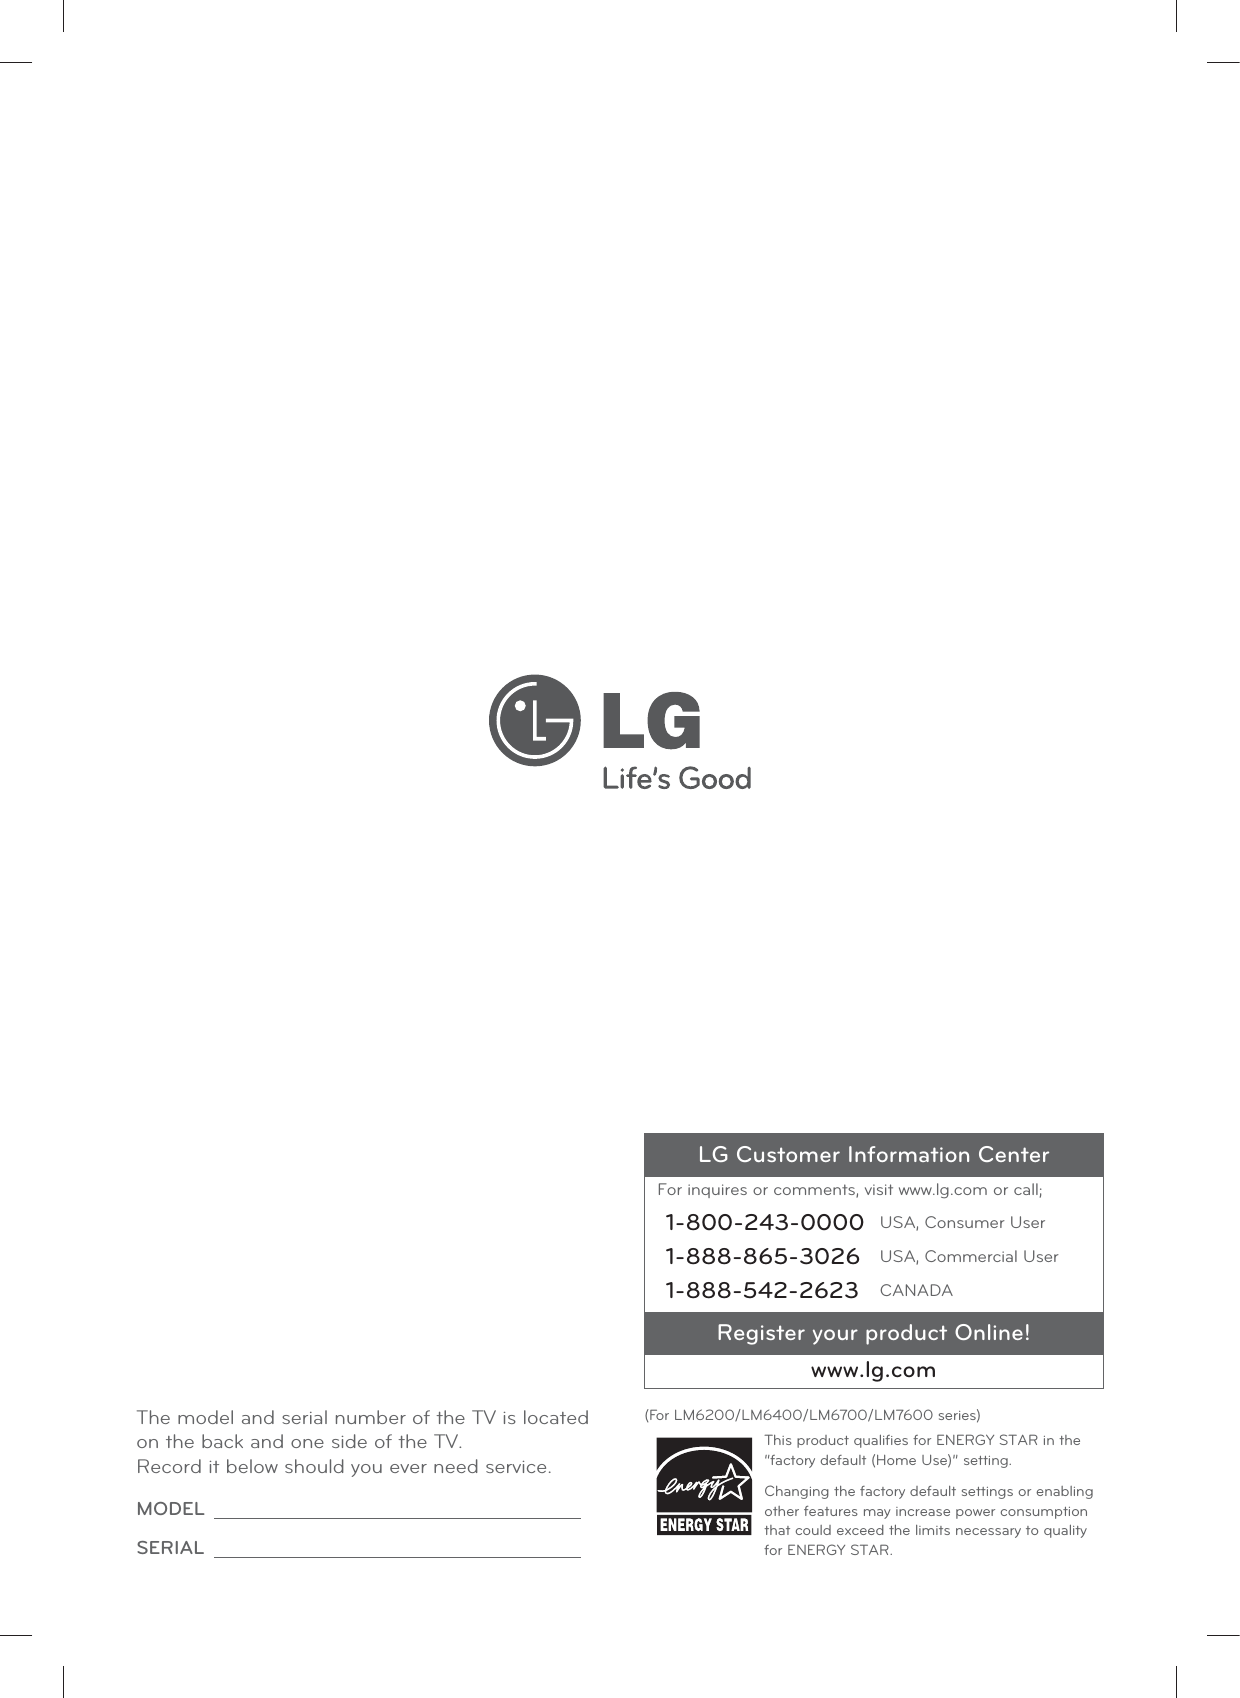 LG Customer Information CenterFor inquires or comments, visit www.lg.com or call;1-800-243-0000 USA, Consumer User1-888-865-3026 USA, Commercial User1-888-542-2623 CANADARegister your product Online!www.lg.comThe model and serial number of the TV is located on the back and one side of the TV. Record it below should you ever need service.MODEL SERIAL (For LM6200/LM6400/LM6700/LM7600 series)This product qualiﬁes for ENERGY STAR in the “factory default (Home Use)” setting.Changing the factory default settings or enabling other features may increase power consumption that could exceed the limits necessary to quality for ENERGY STAR.